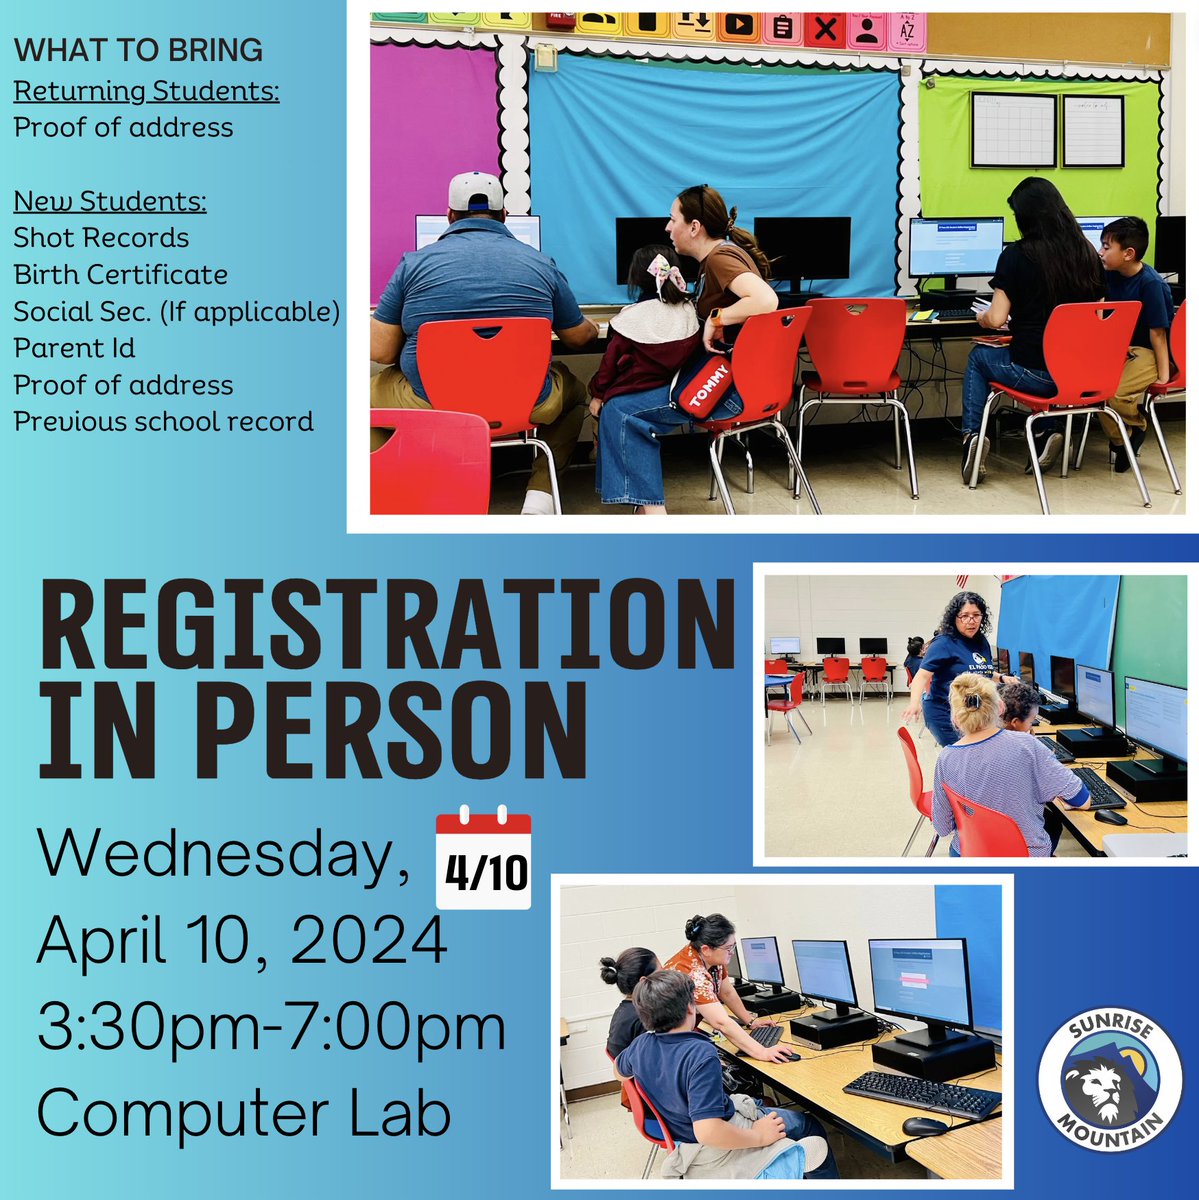 Come by this Wednesday afternoon and use our computer lab to register your child. We will be available to scan documents or help you with login info.*Este miercoles podra venir a registrar a sus estudiantes. Las computadoras estarán disponibles.